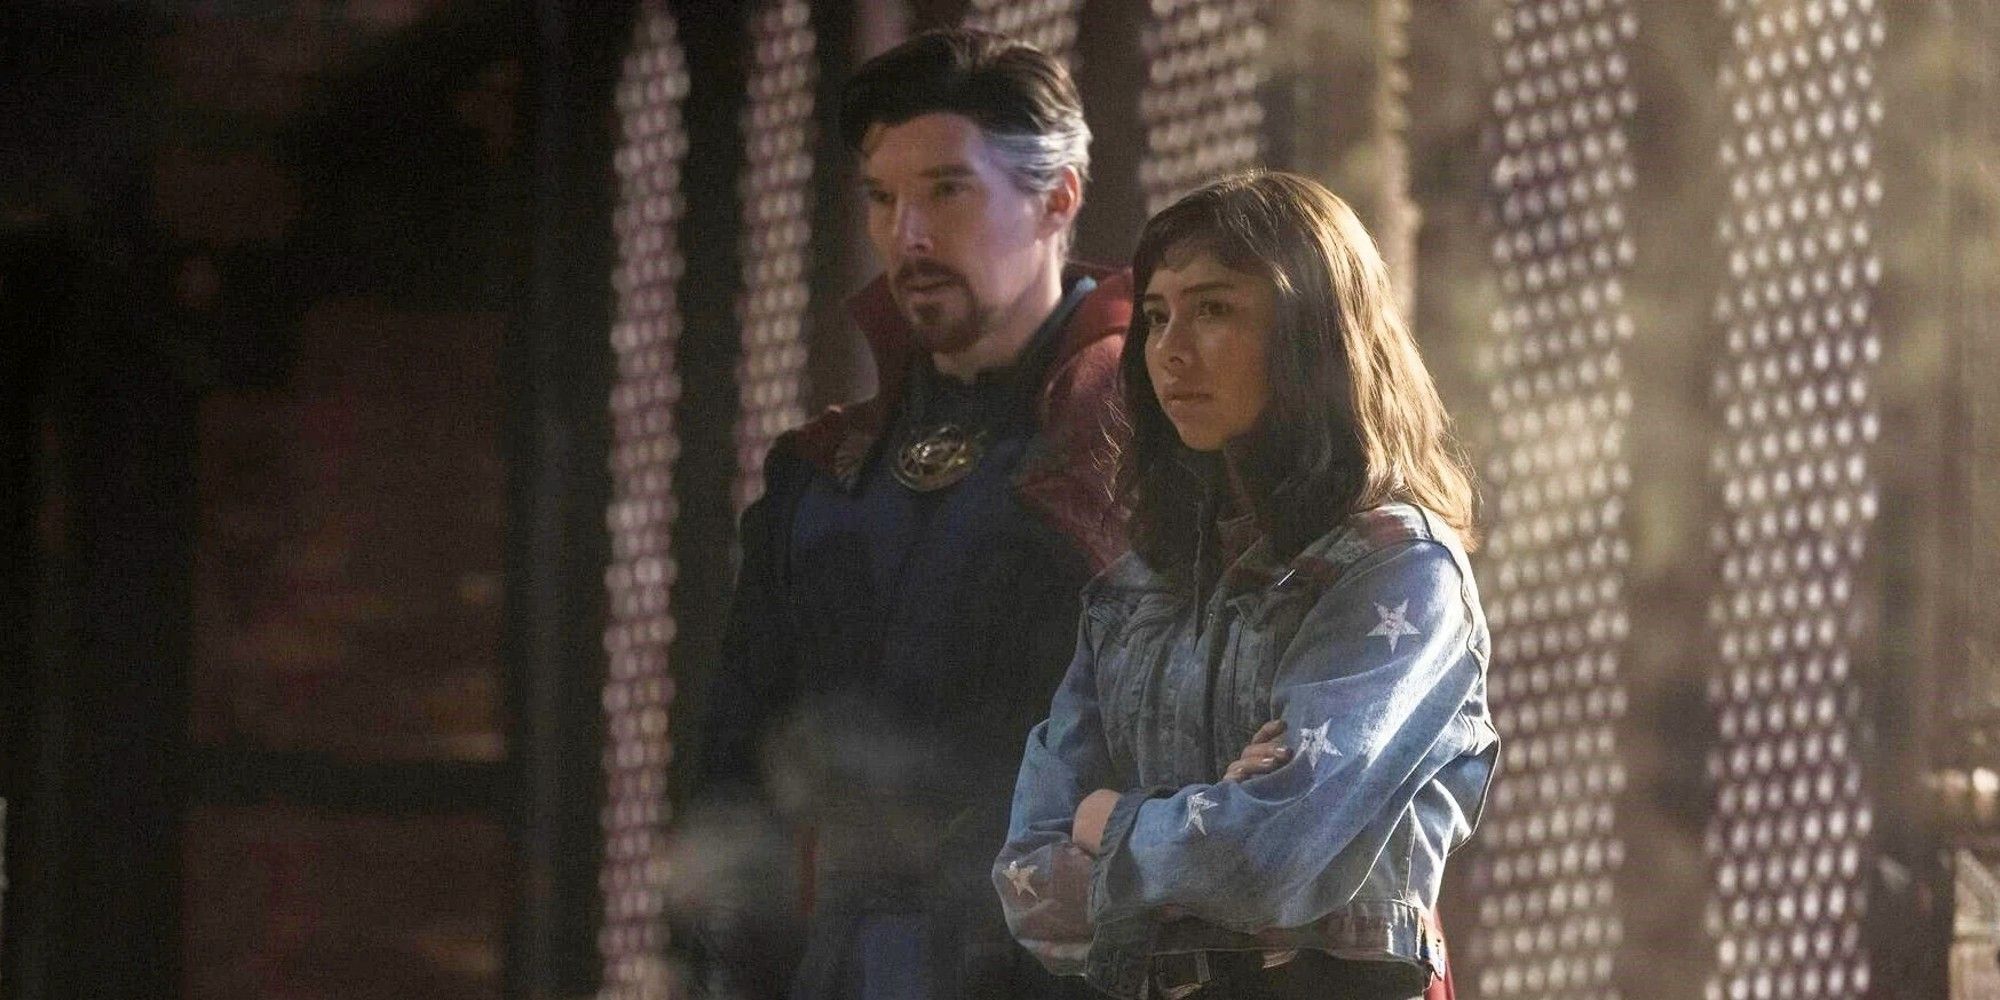 Benedict Cumberbatch and Xochitl Gomez as Doctor Strange and America Chavez looking seriously in the same direction in 'Doctor Strange in the Multiverse of Madness'